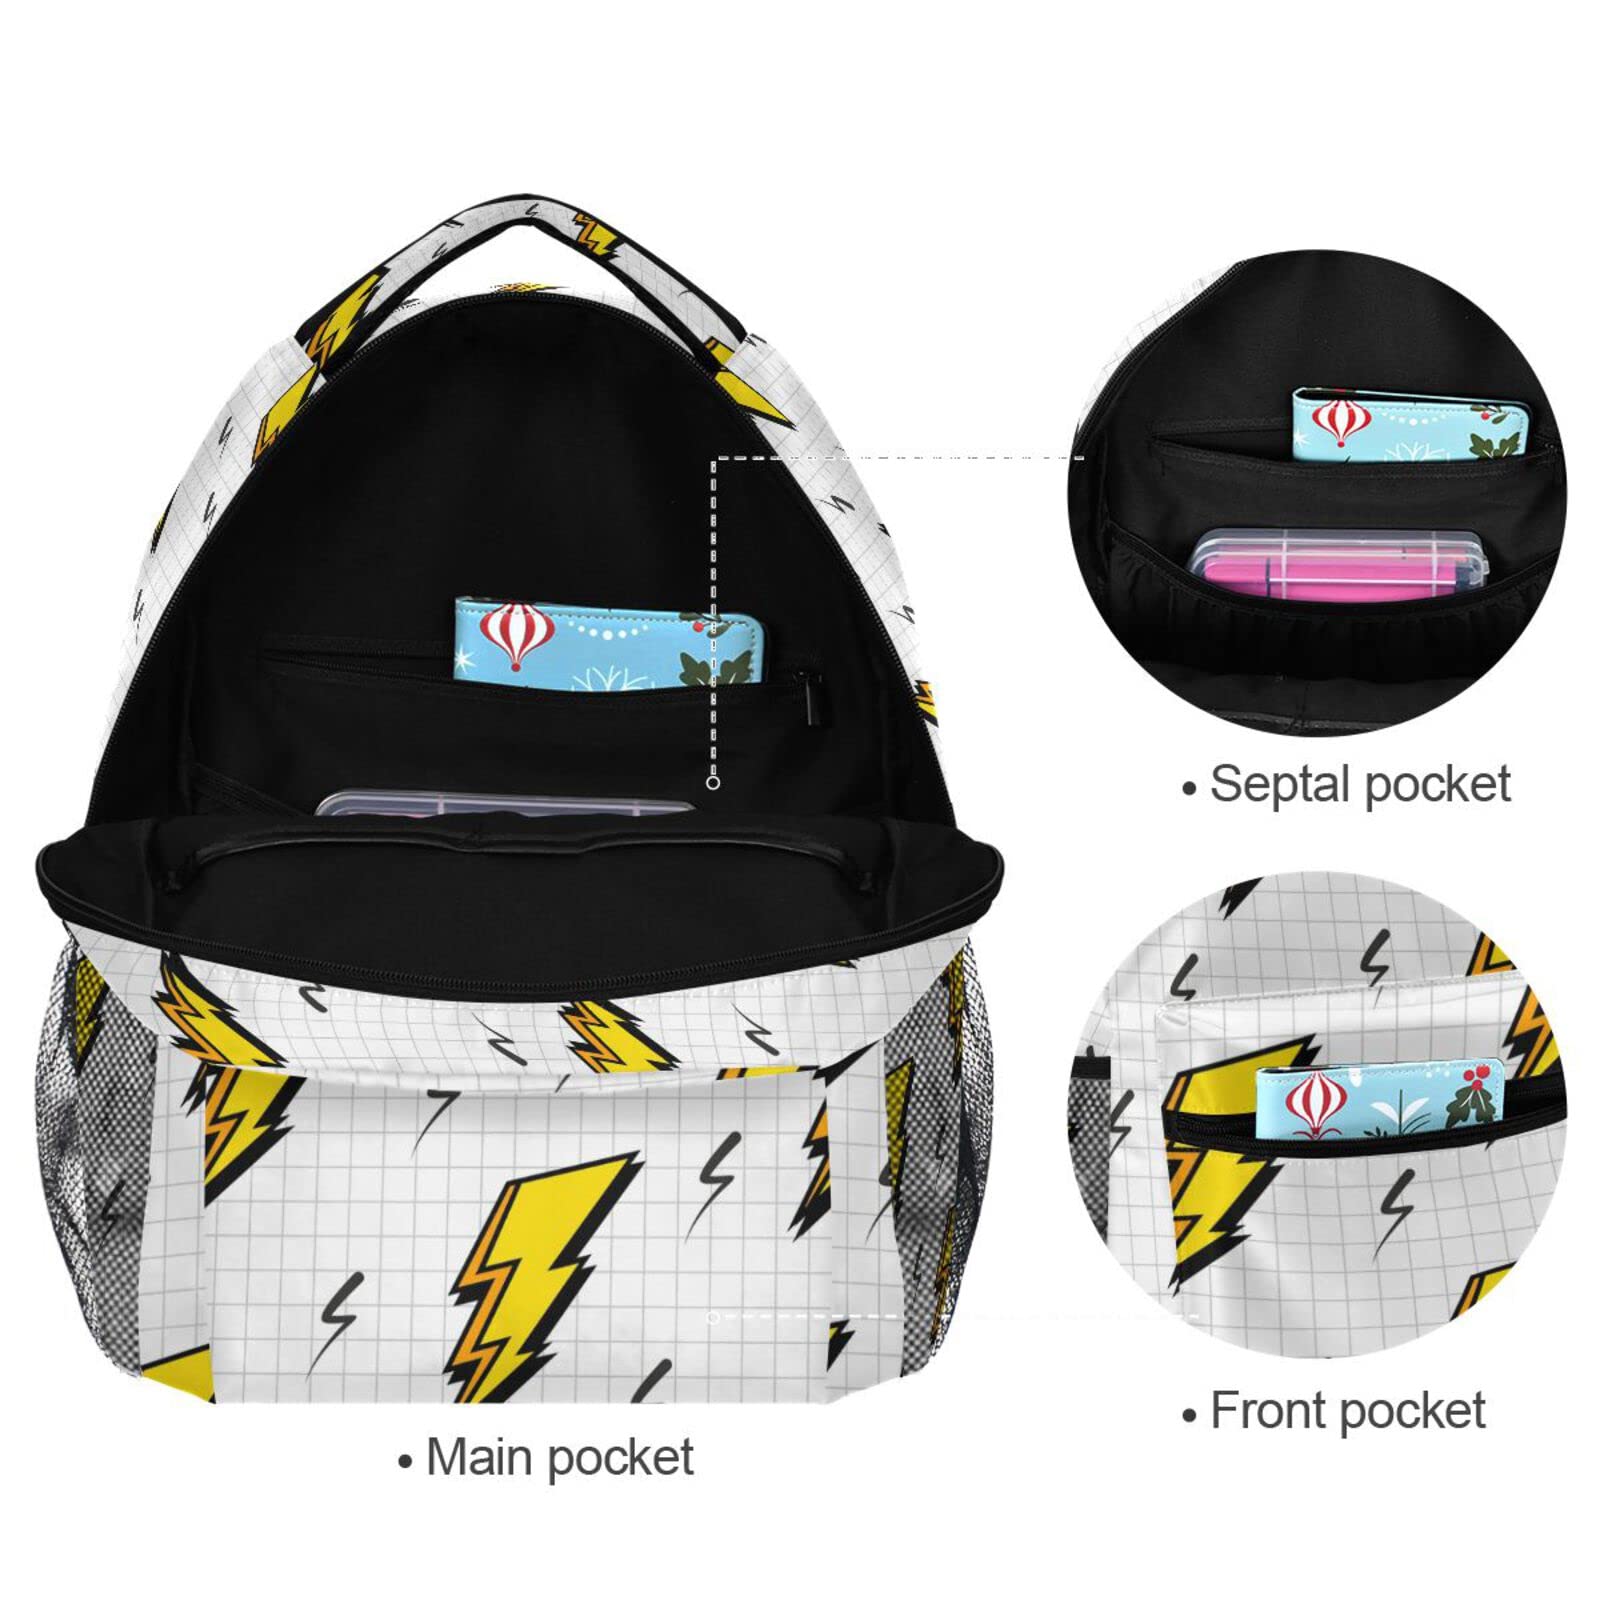 Tarity Lightning Bolts School Backpack Small Travel Bag Students Bookbags Teenagers Casual Daypacks Stylish Print Durable Backpack Laptop Computer Bag For Kids Boys Girls Women